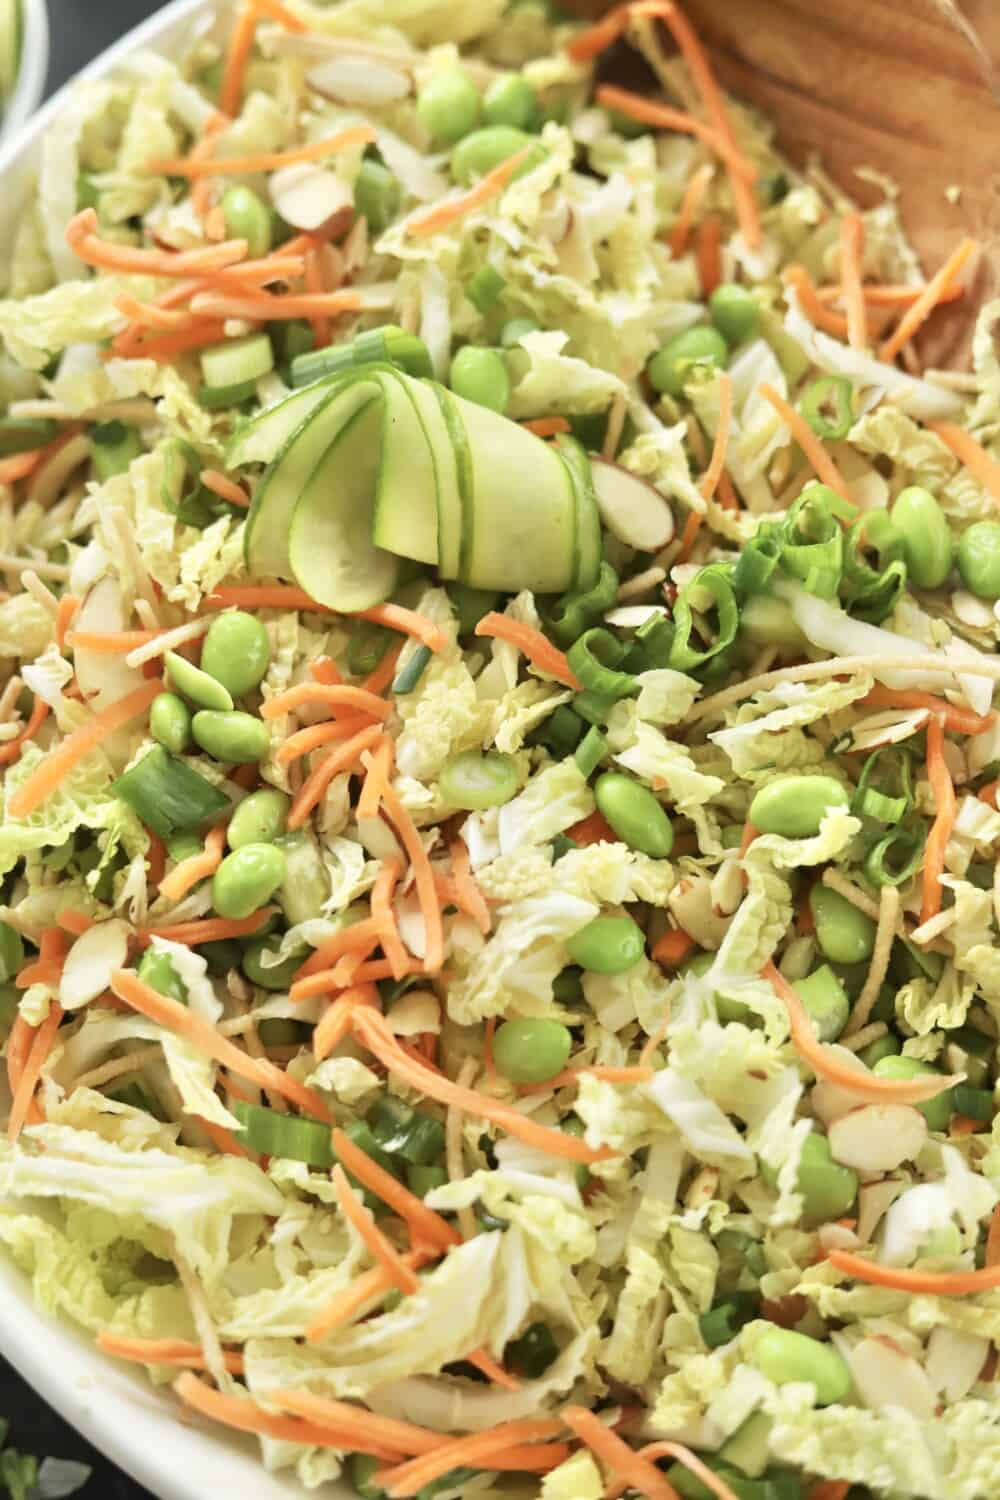 close up image of a tossed cucumber thai salad recipe made with edamame, carrots, cucumber, slivered almonds, green onions, and cilantro in a white bowl